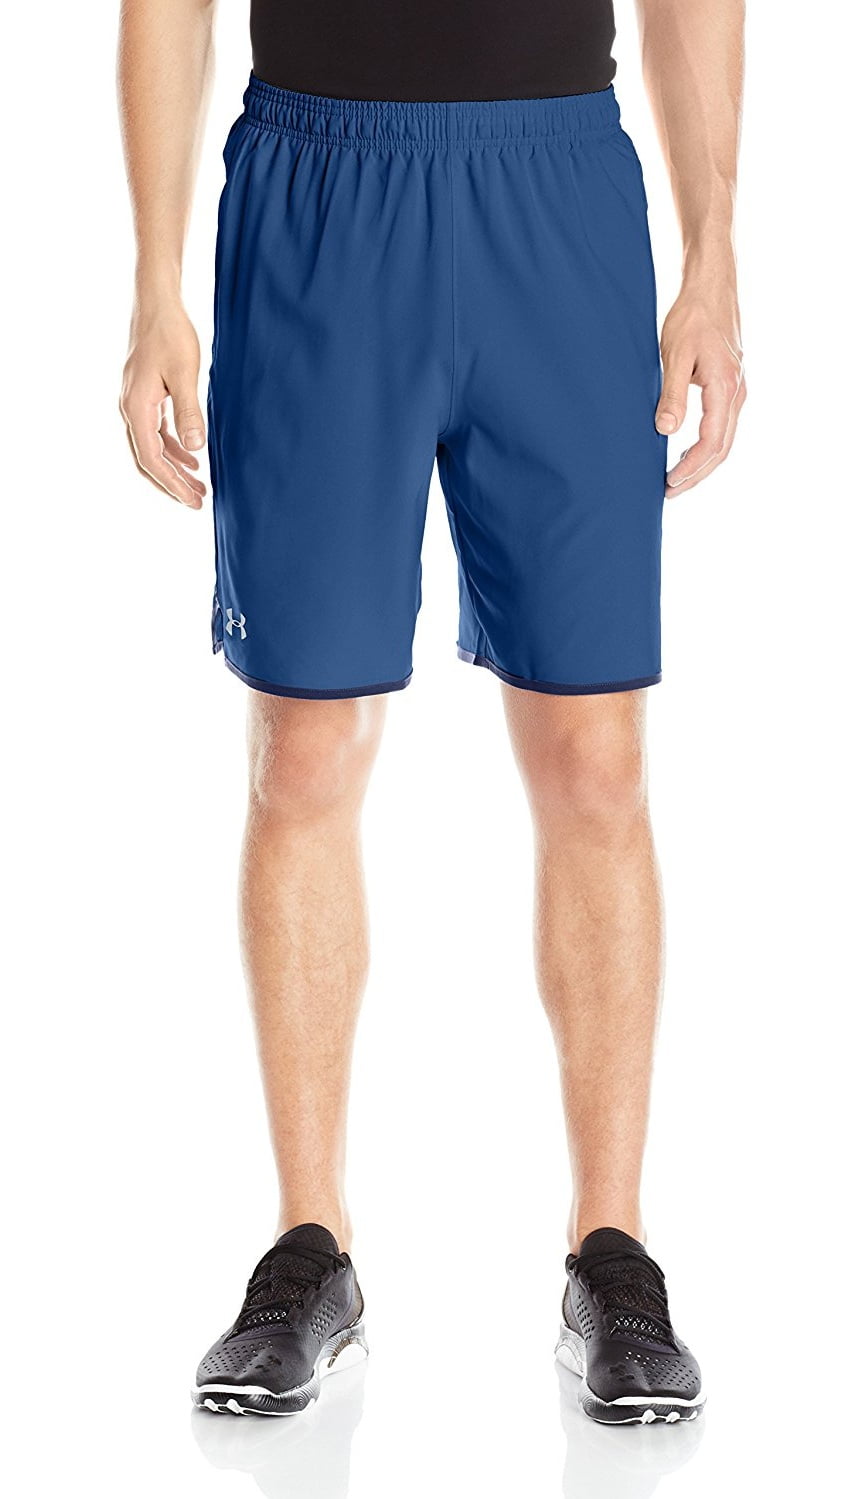 NEW Under Armour Men's Qualifier 9 inch Woven Shorts Gym Training 